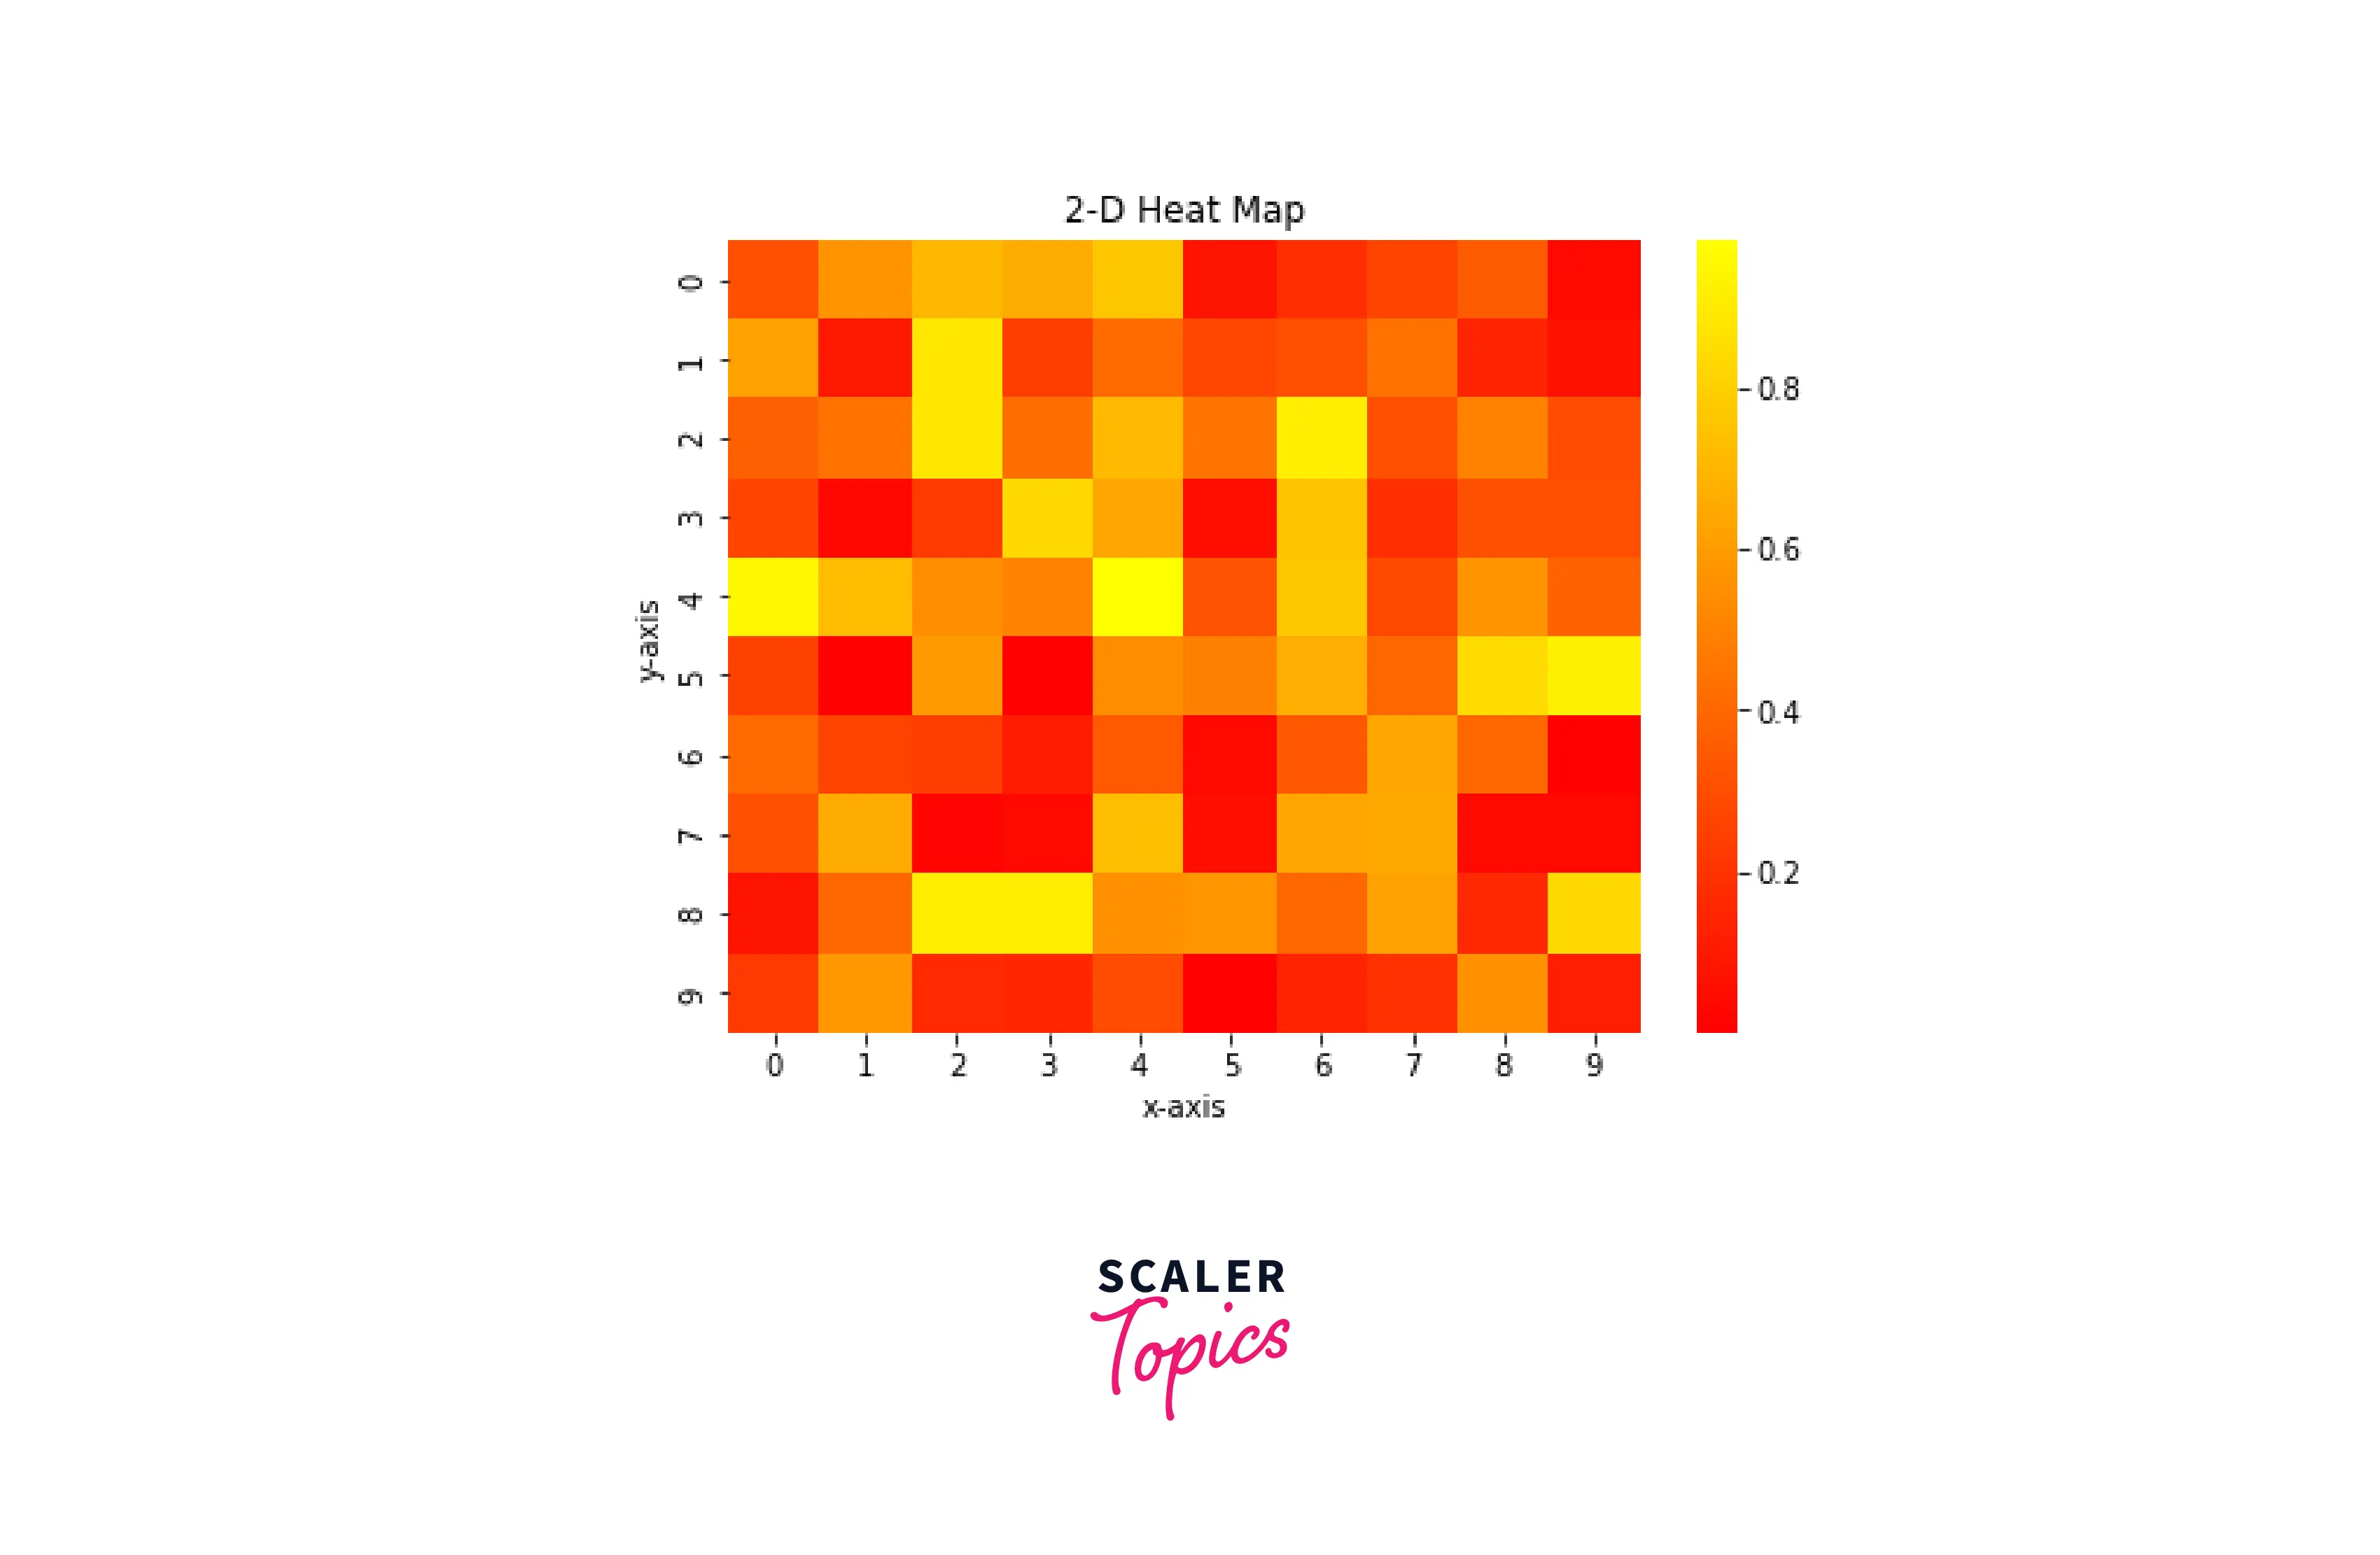 Using Seaborn Library